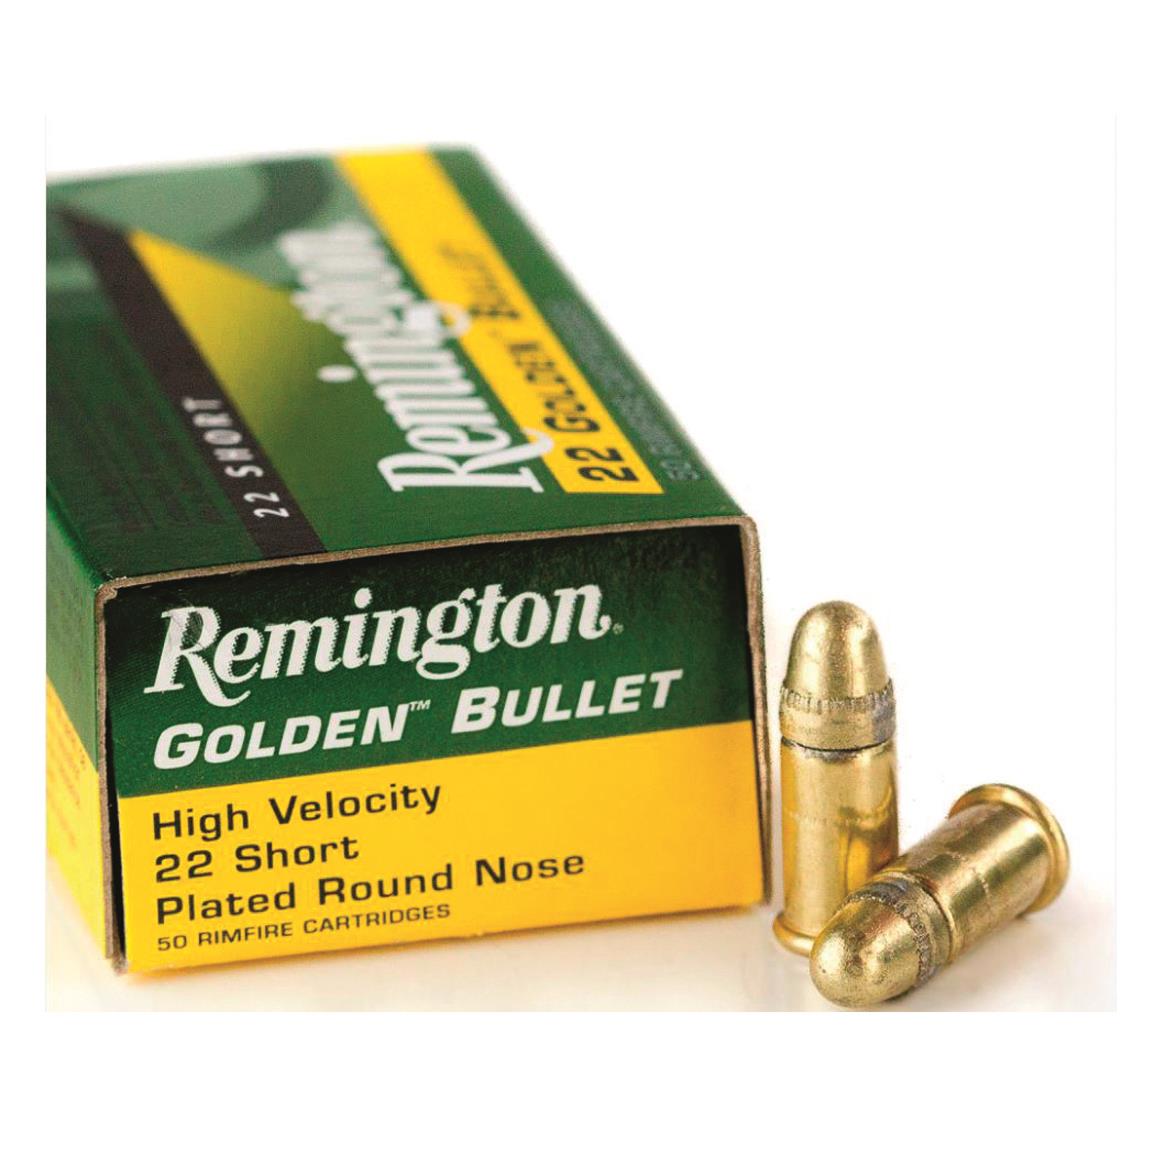 Remington Golden Bullet 22 Short High Velocity Plated Round Nose | Free ...